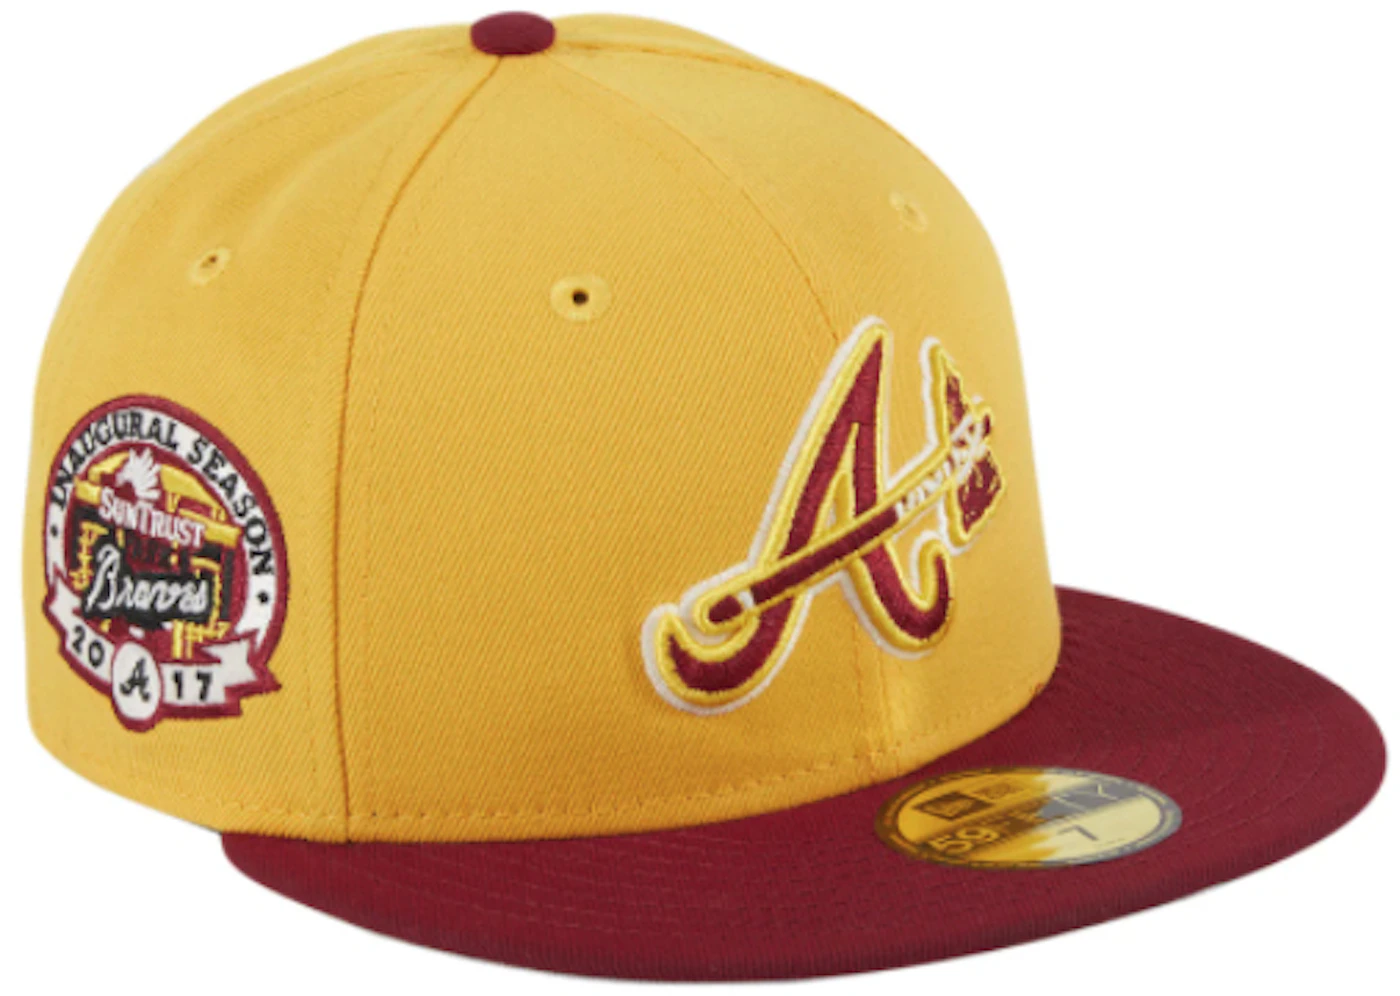 New Era Atlanta Braves Quiet Storm Hat Club Exclusive Inaugural Patch Alternate 59FIFTY Fitted Hat Gold/Cardinal